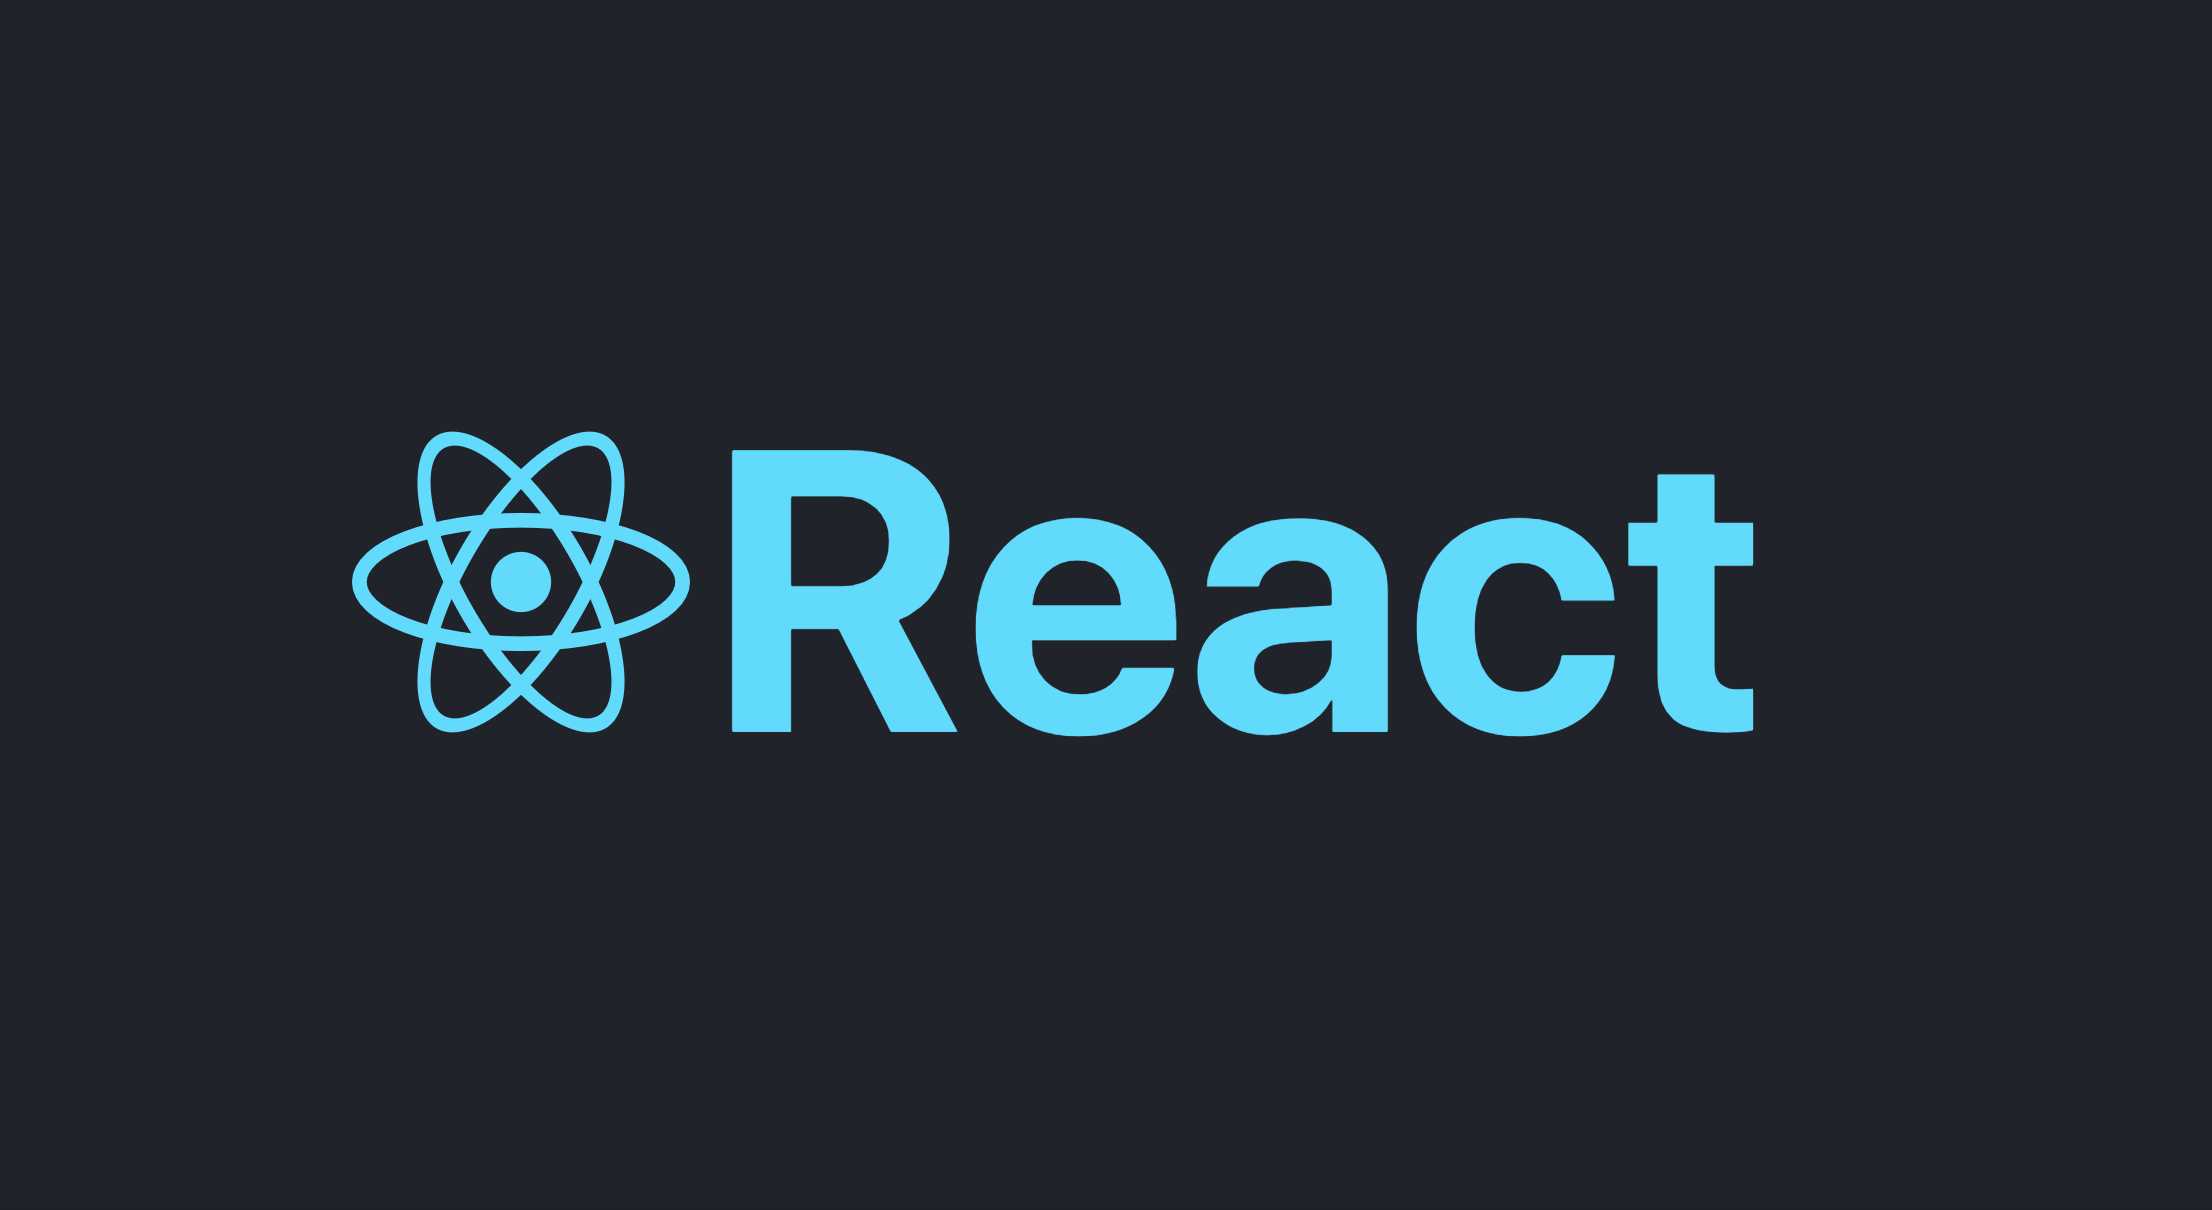 The Future Frontier: TypeScript, React, and Beyond